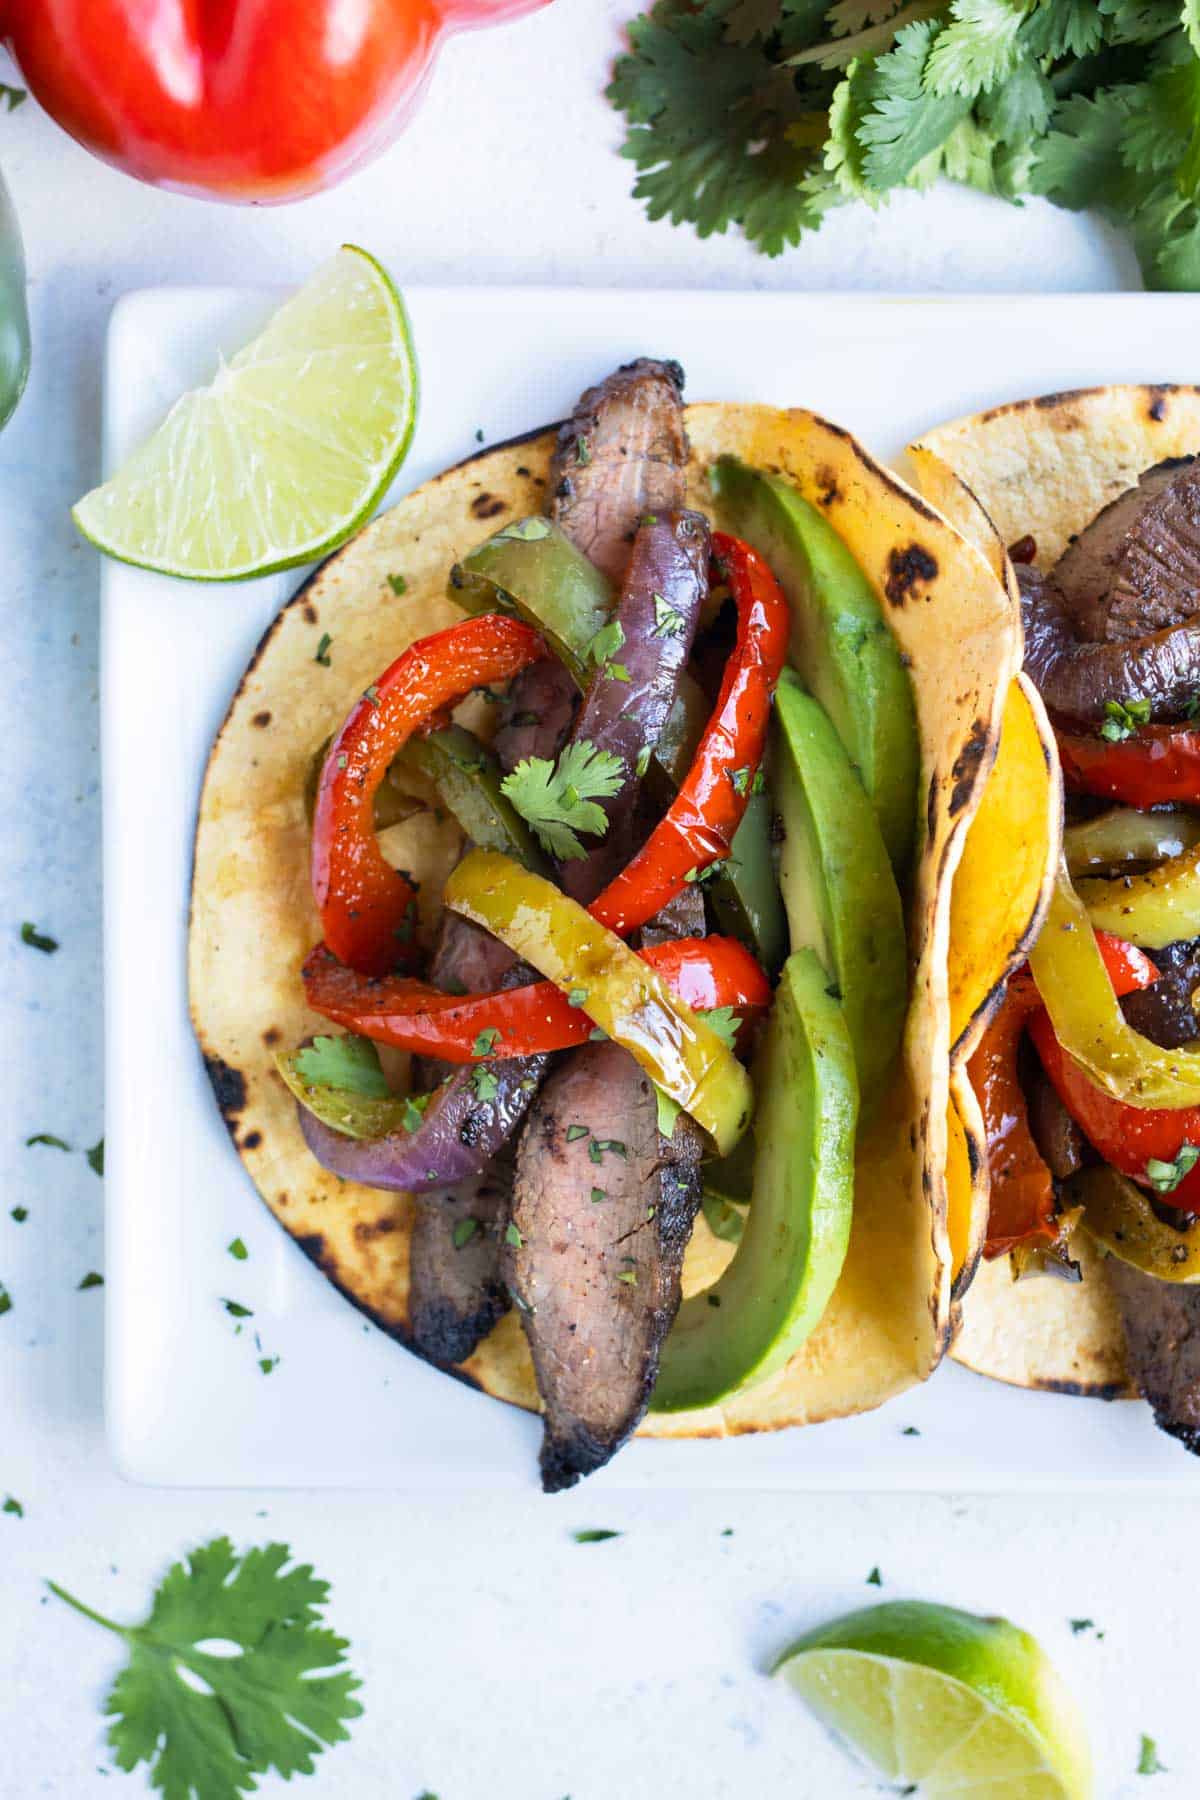 Corn tortillas are loaded with steak and vegetables.